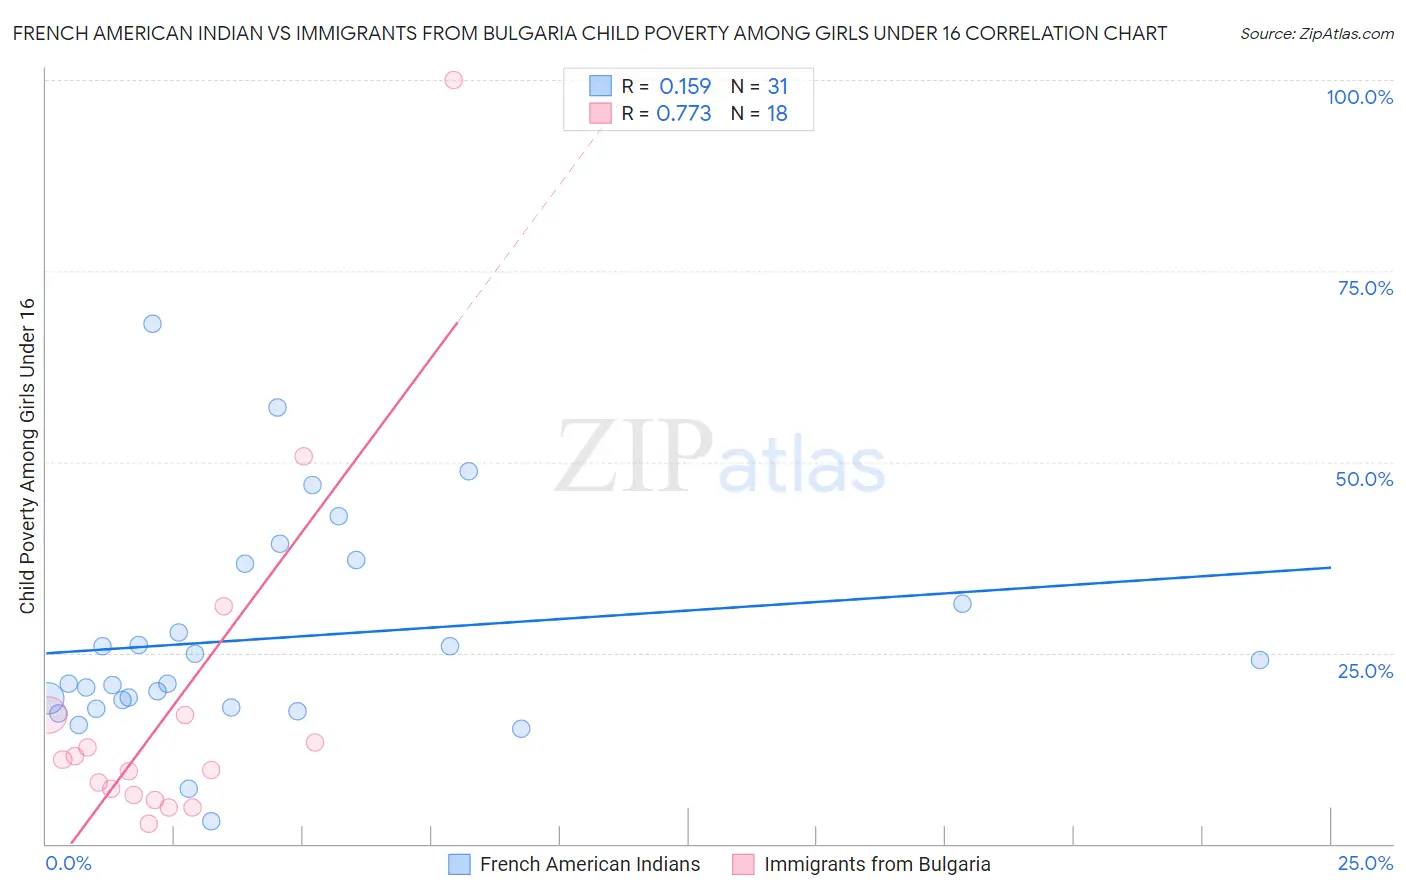 French American Indian vs Immigrants from Bulgaria Child Poverty Among Girls Under 16